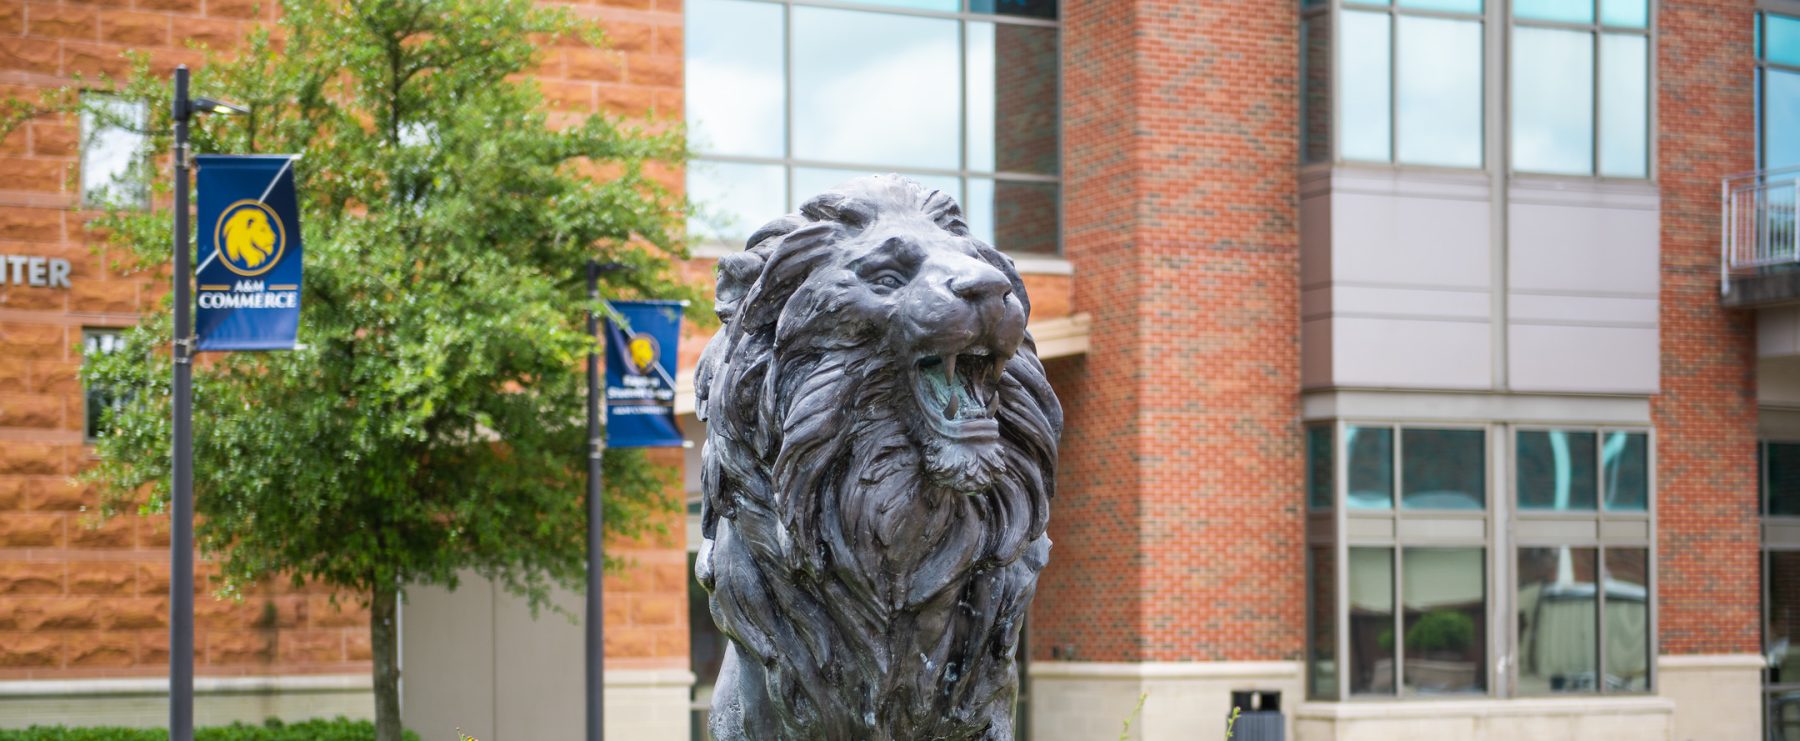 A lion statue with spring flowers blooming at its base on campus at A&M-Commerce.